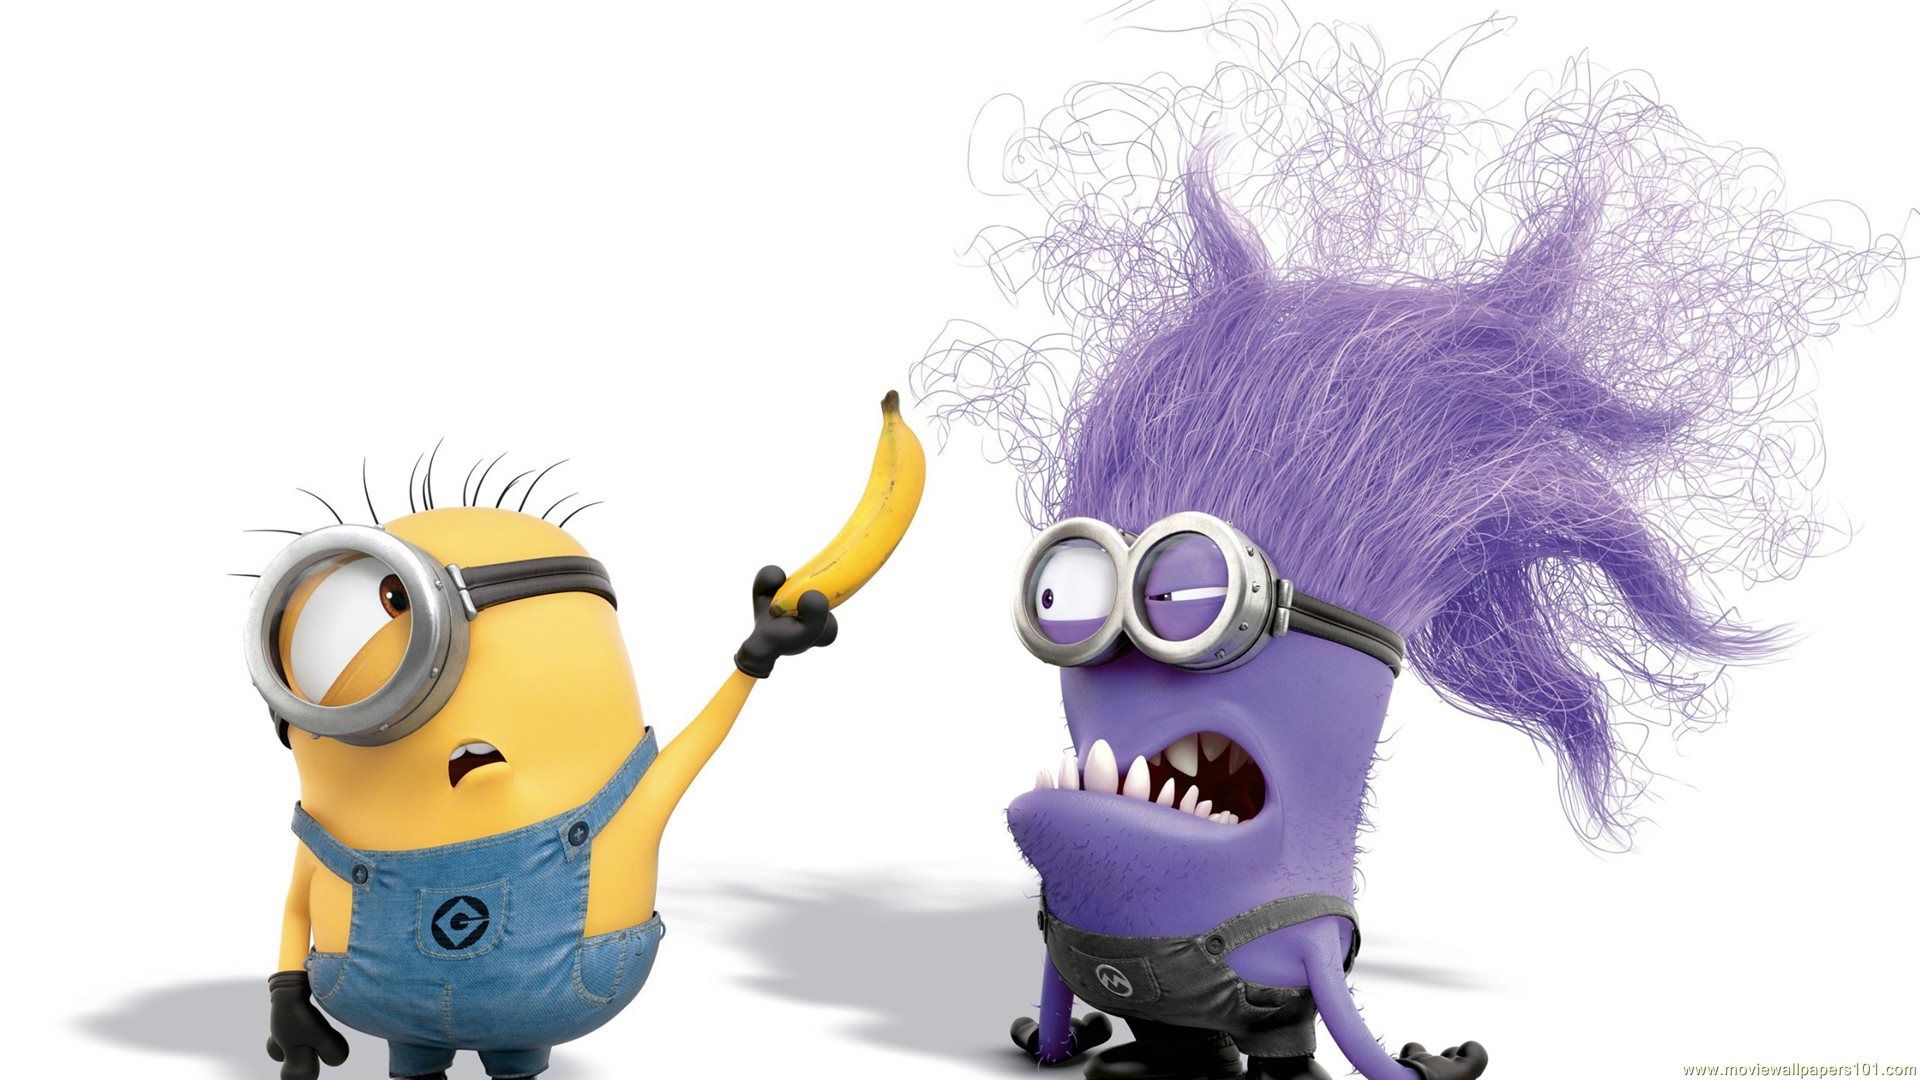 Minions Comedy Animated Movie Wallpaper - DreamLoveWallpapers